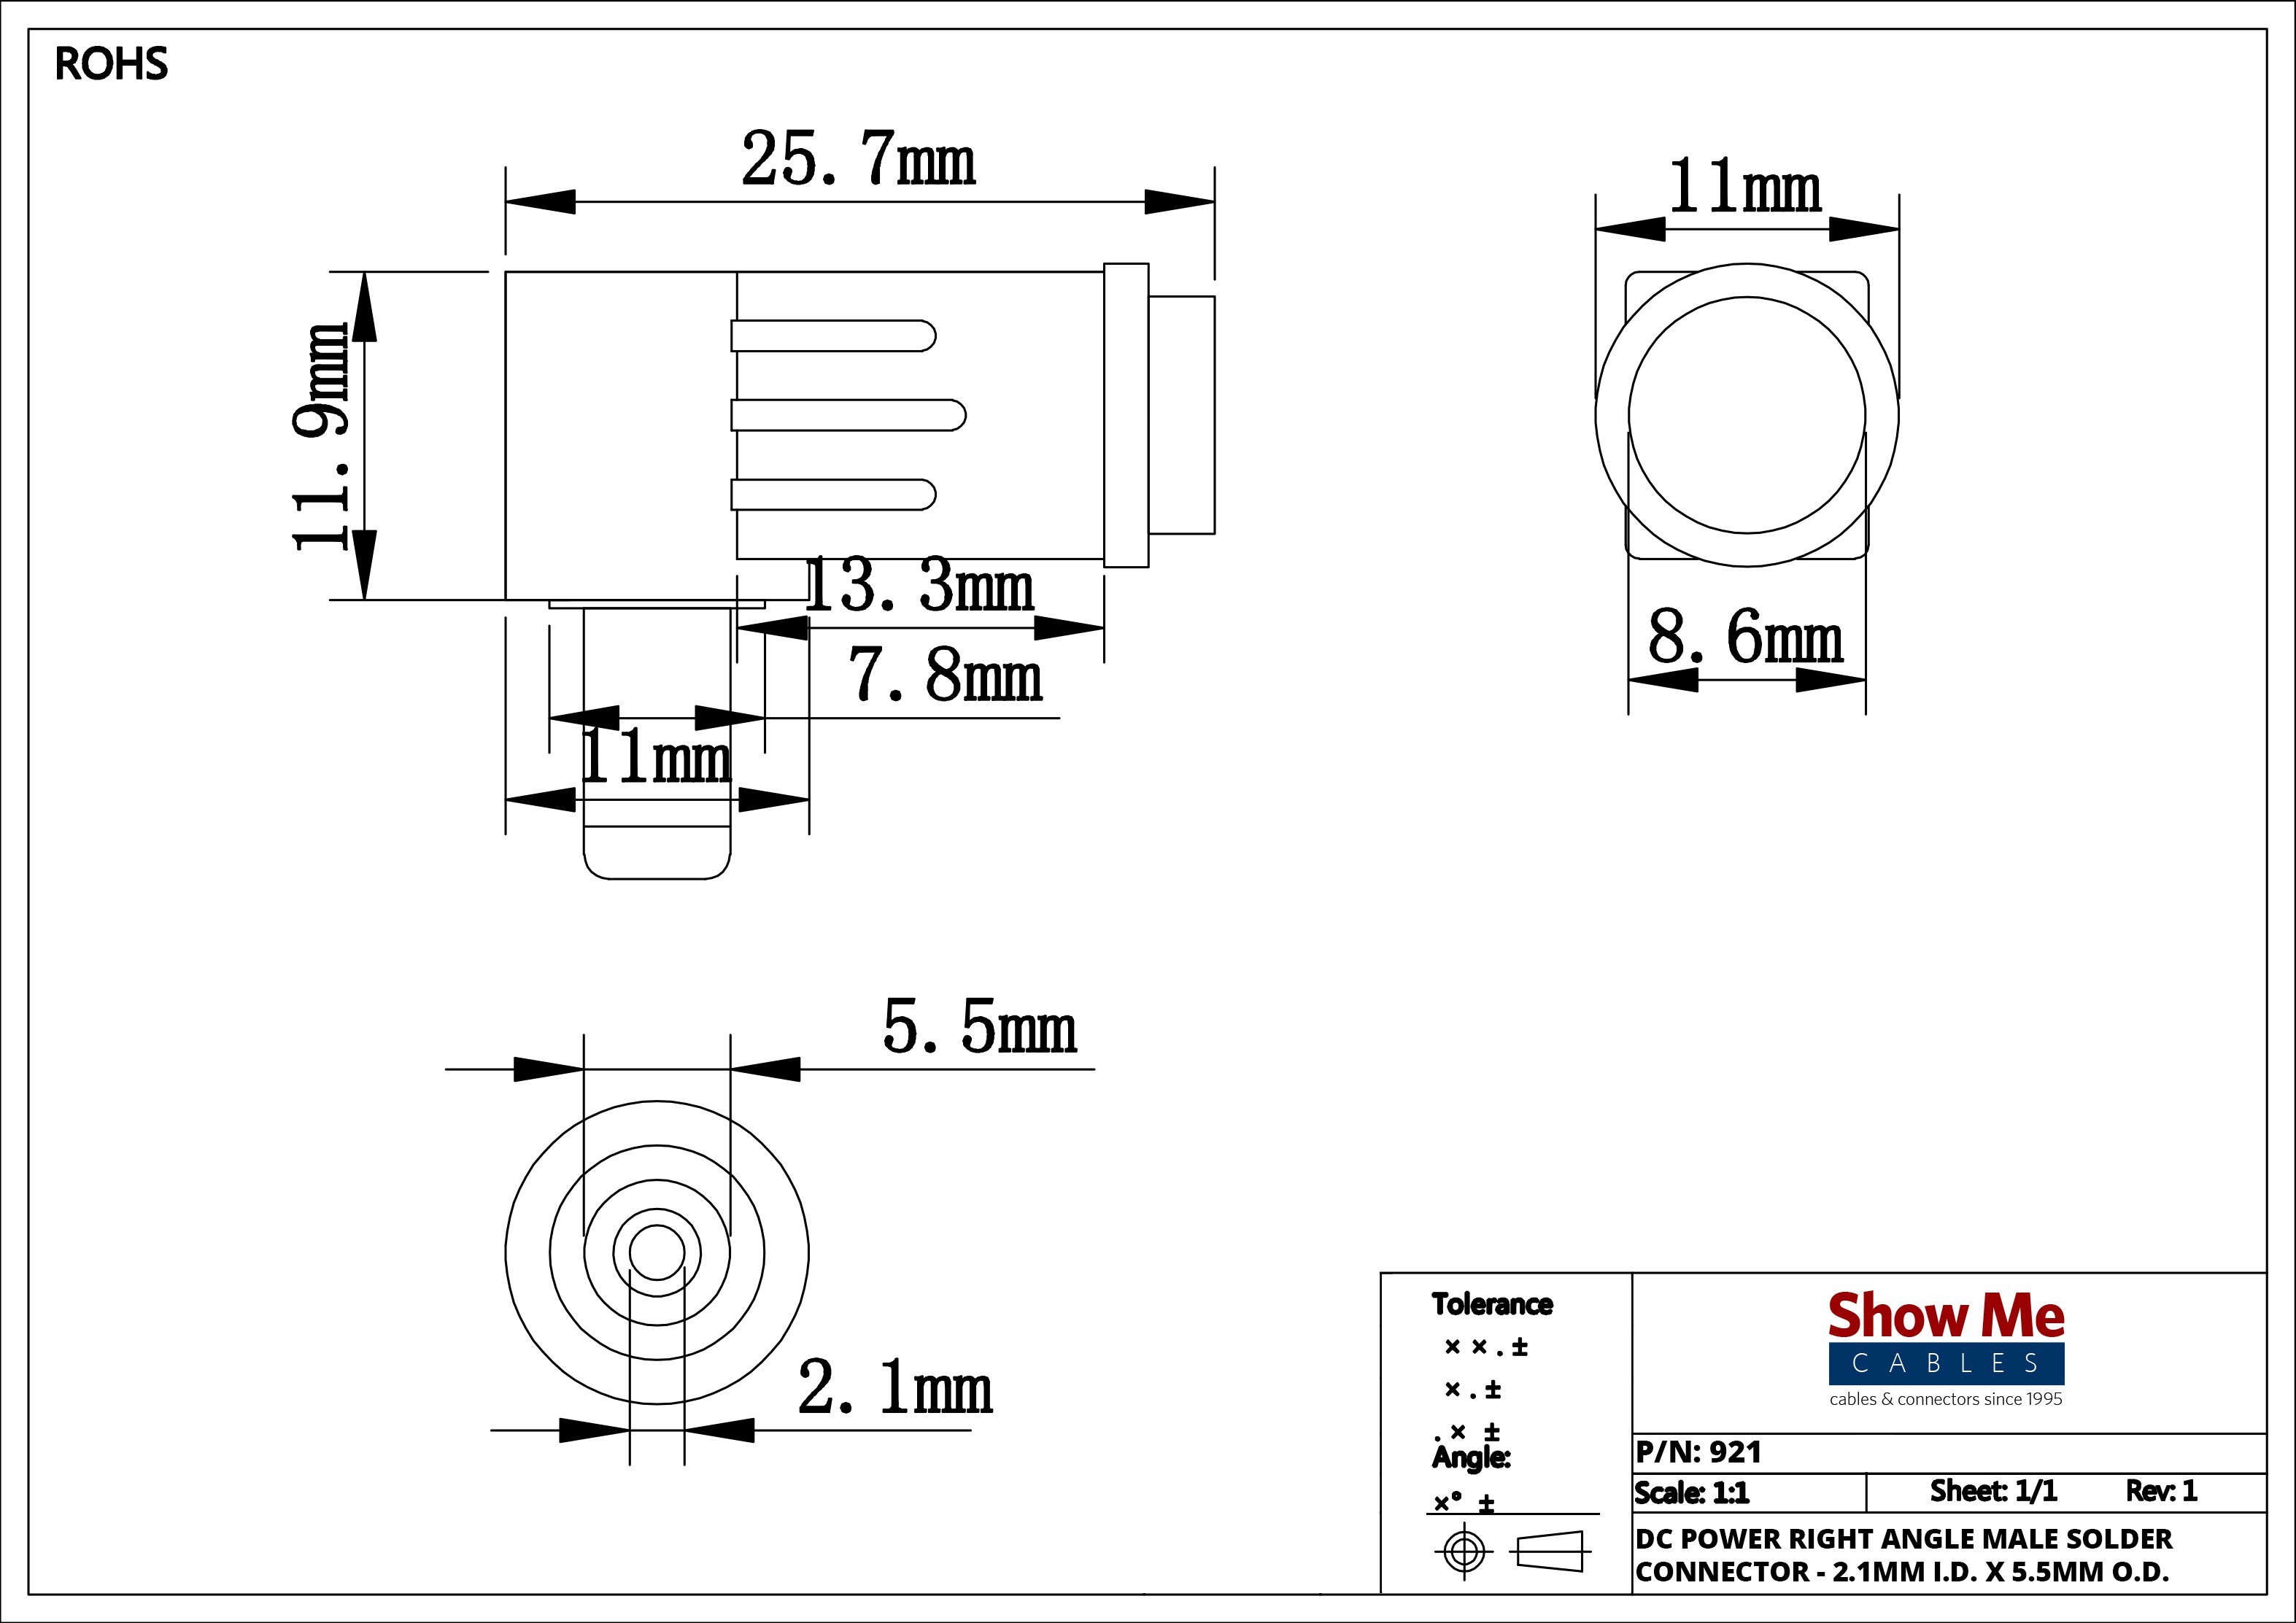 Pigtail Wiring Diagram Collection 3 5 Mm Stereo Jack Wiring Diagram Elegant 2 5mm Id